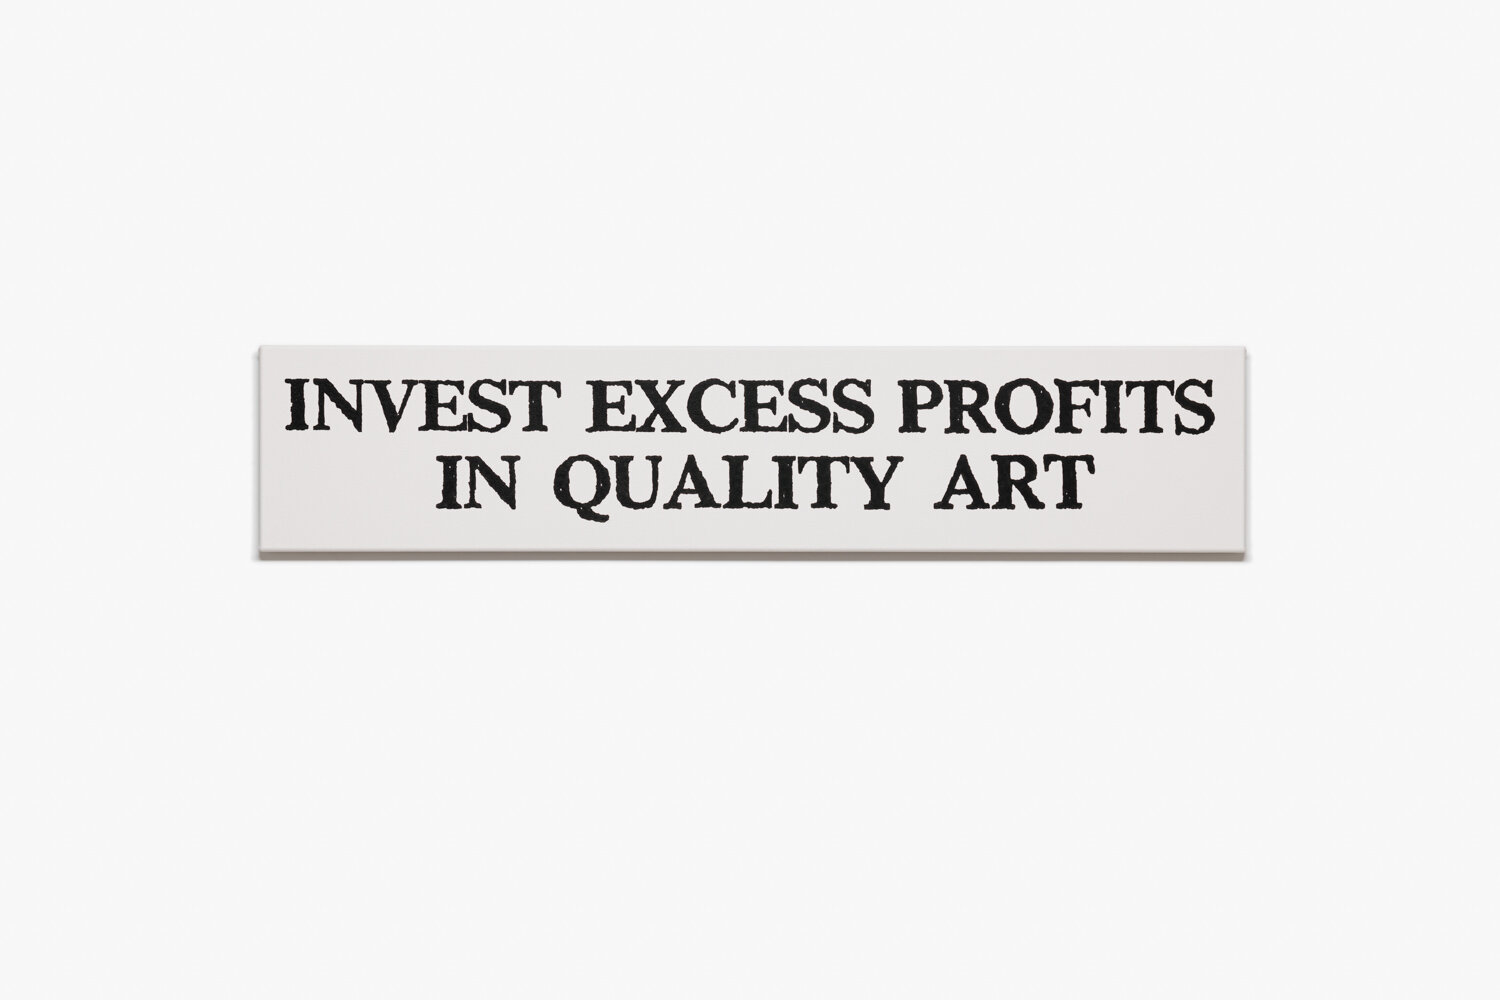 INVEST EXCESS PROFITS IN QUALITY ART (June 4, 1978) 2021